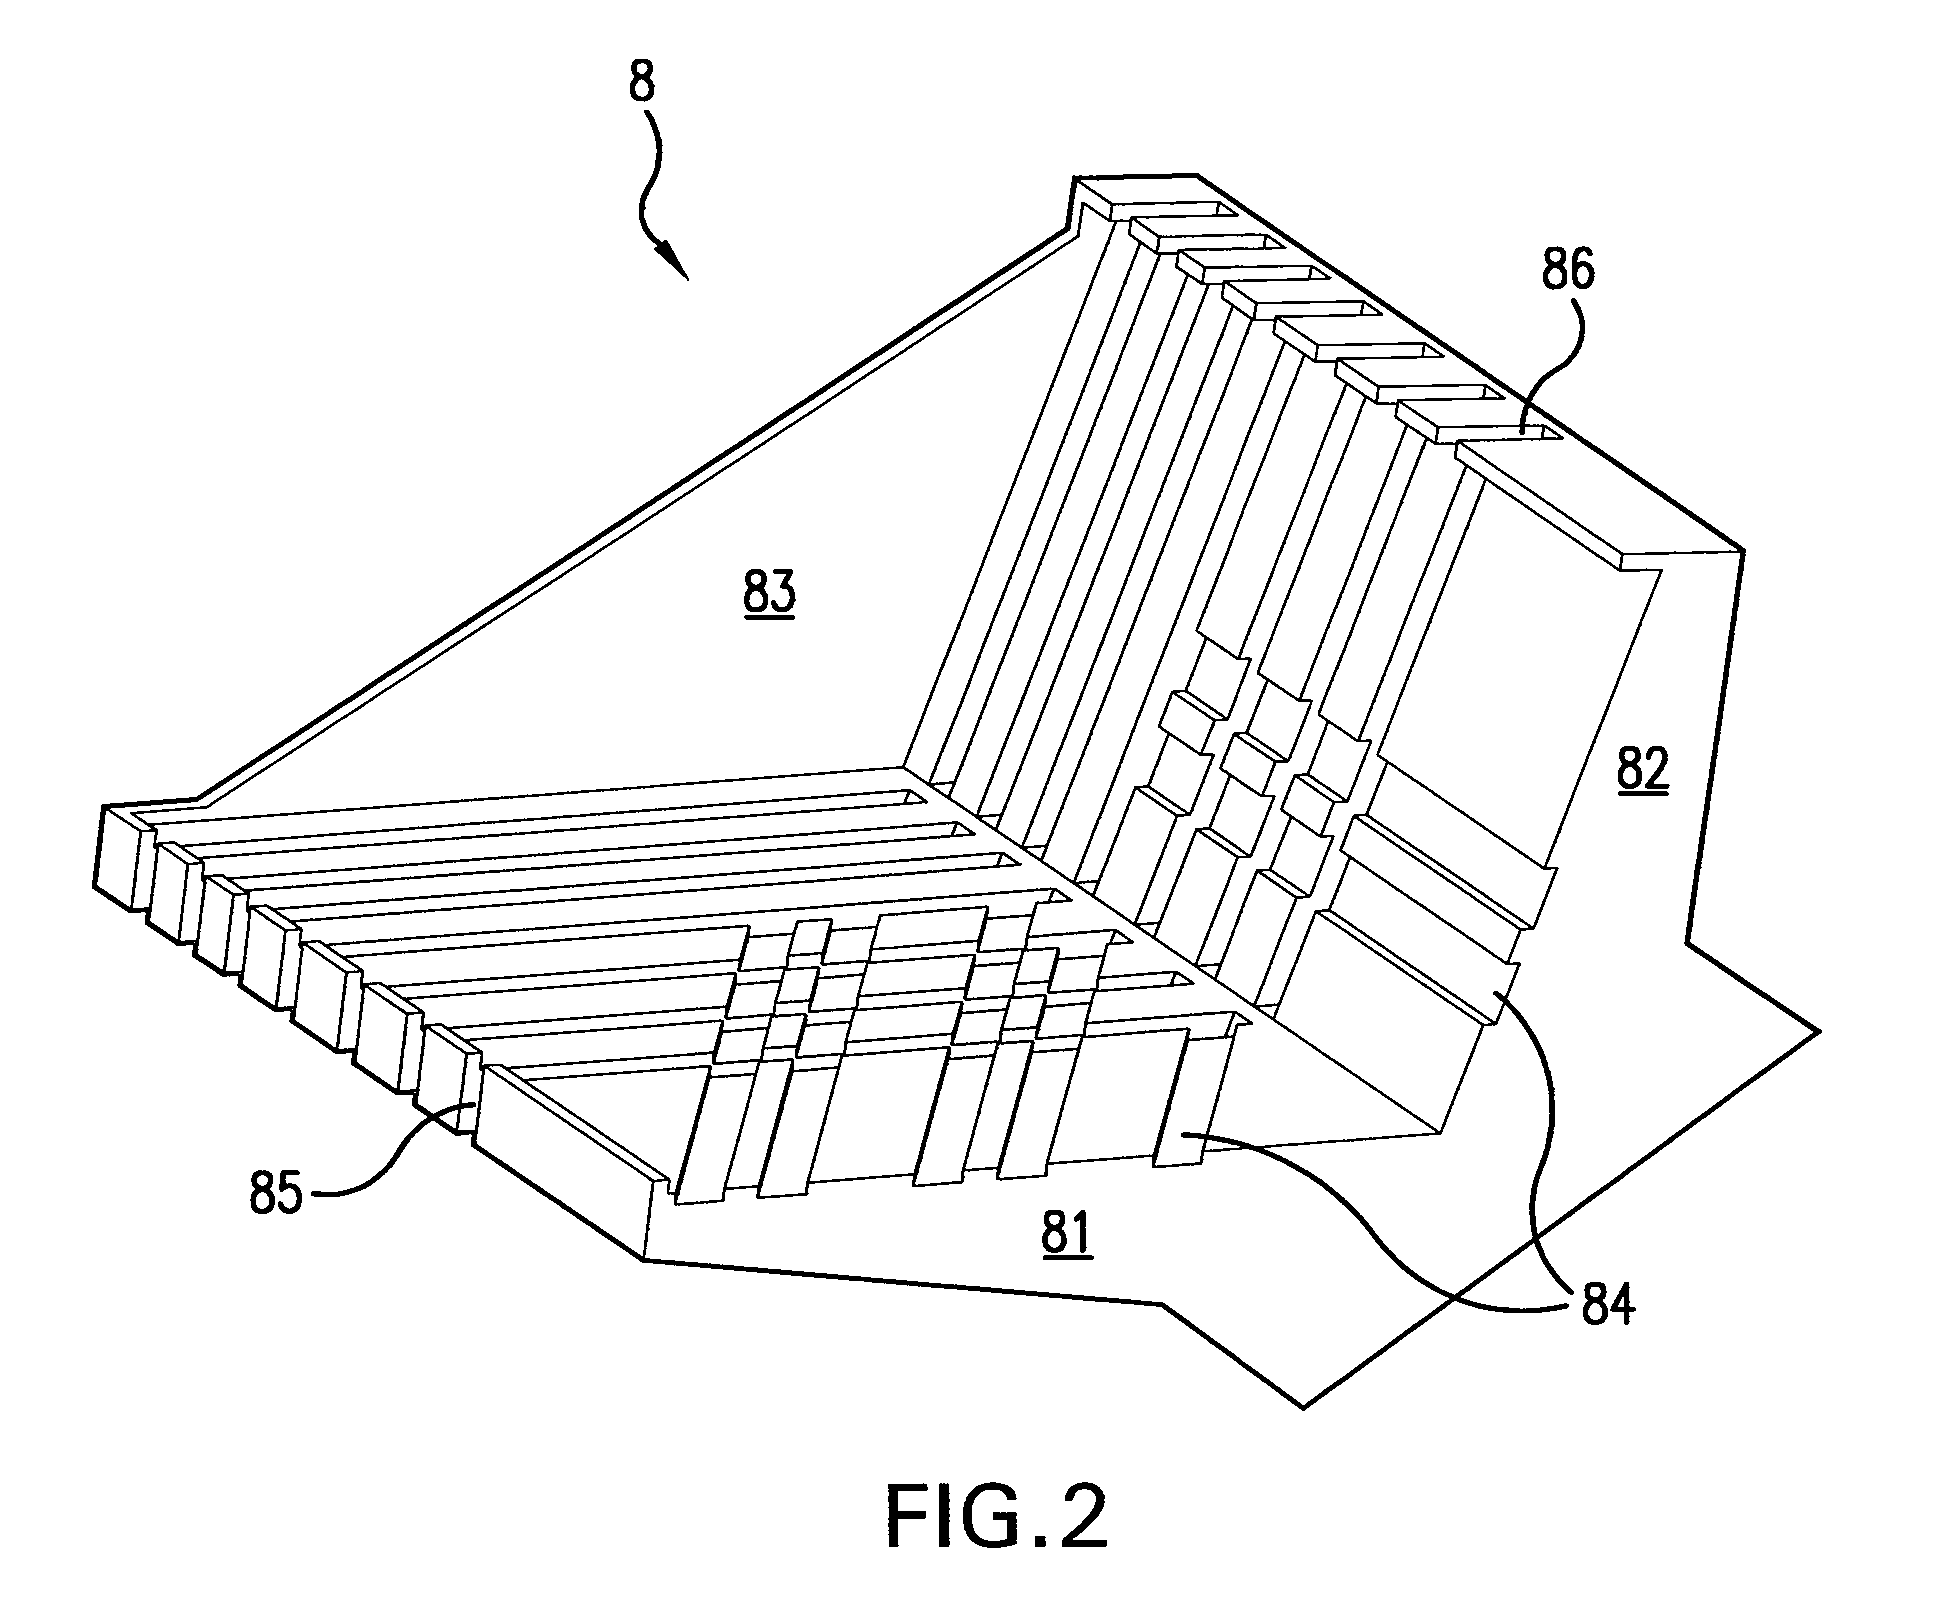 Mail tray unloader with shuttle transfer through system comprising tilting